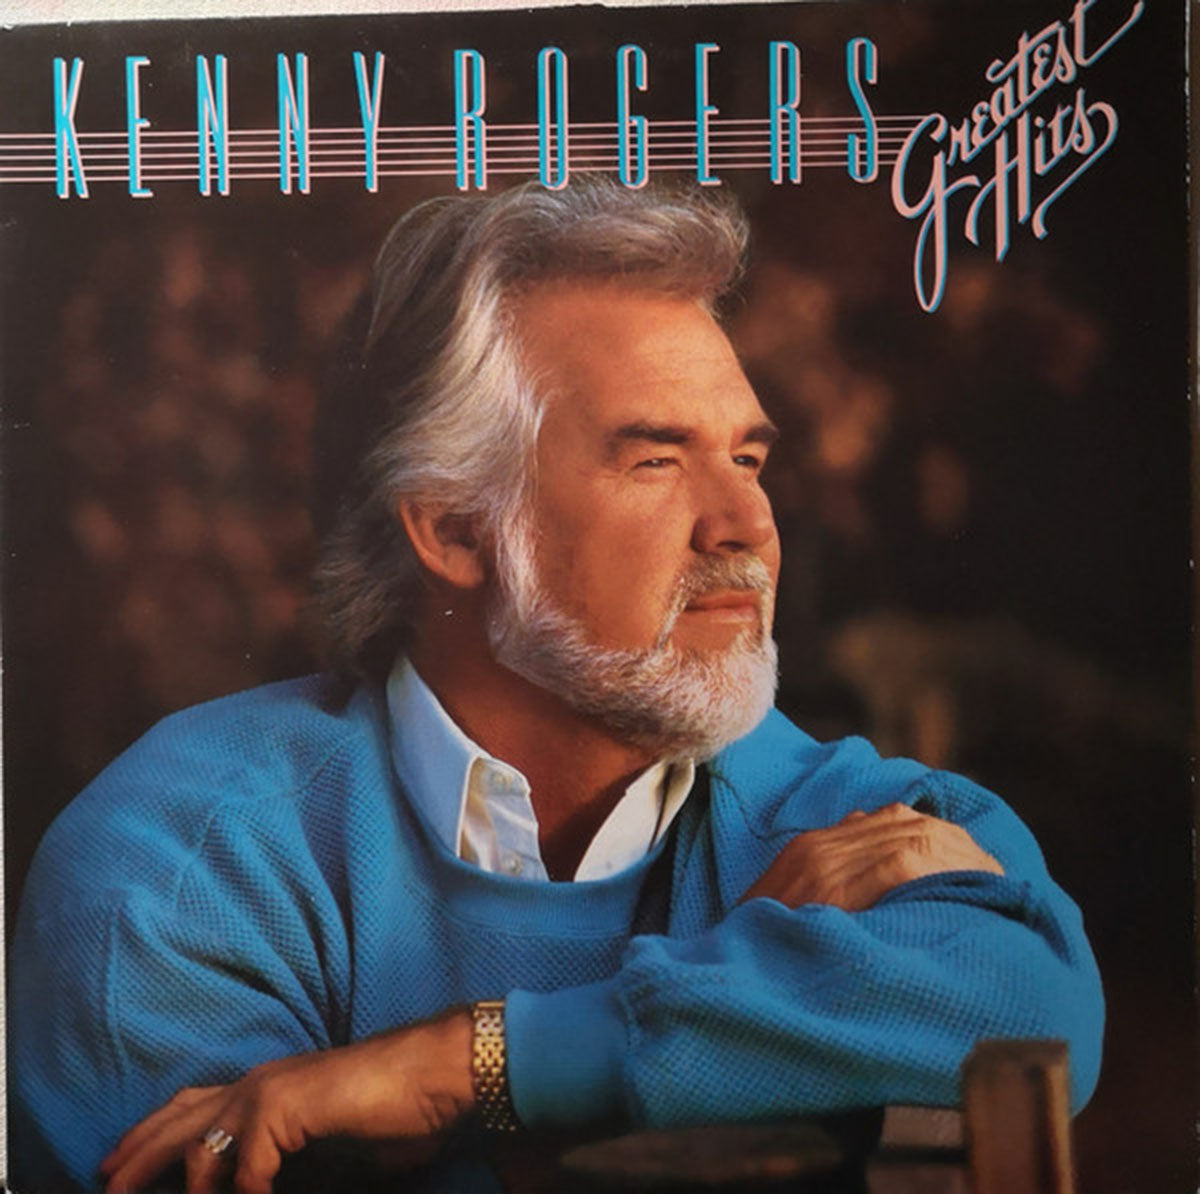 Kenny Rogers – Greatest Hits - SEALED!